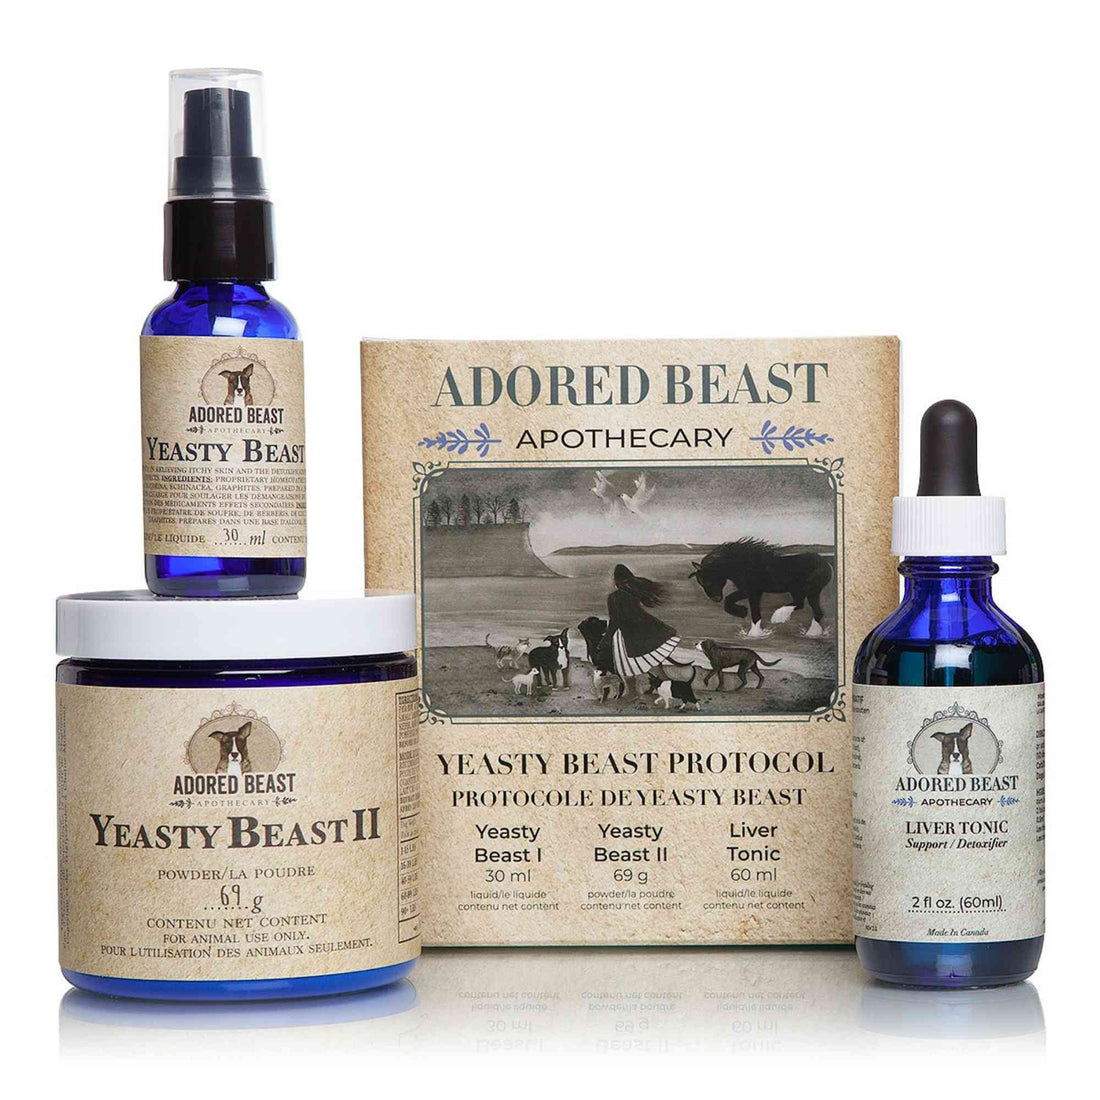 Yeasty Beast Protocol 3 product kit for Dogs Adored Beast